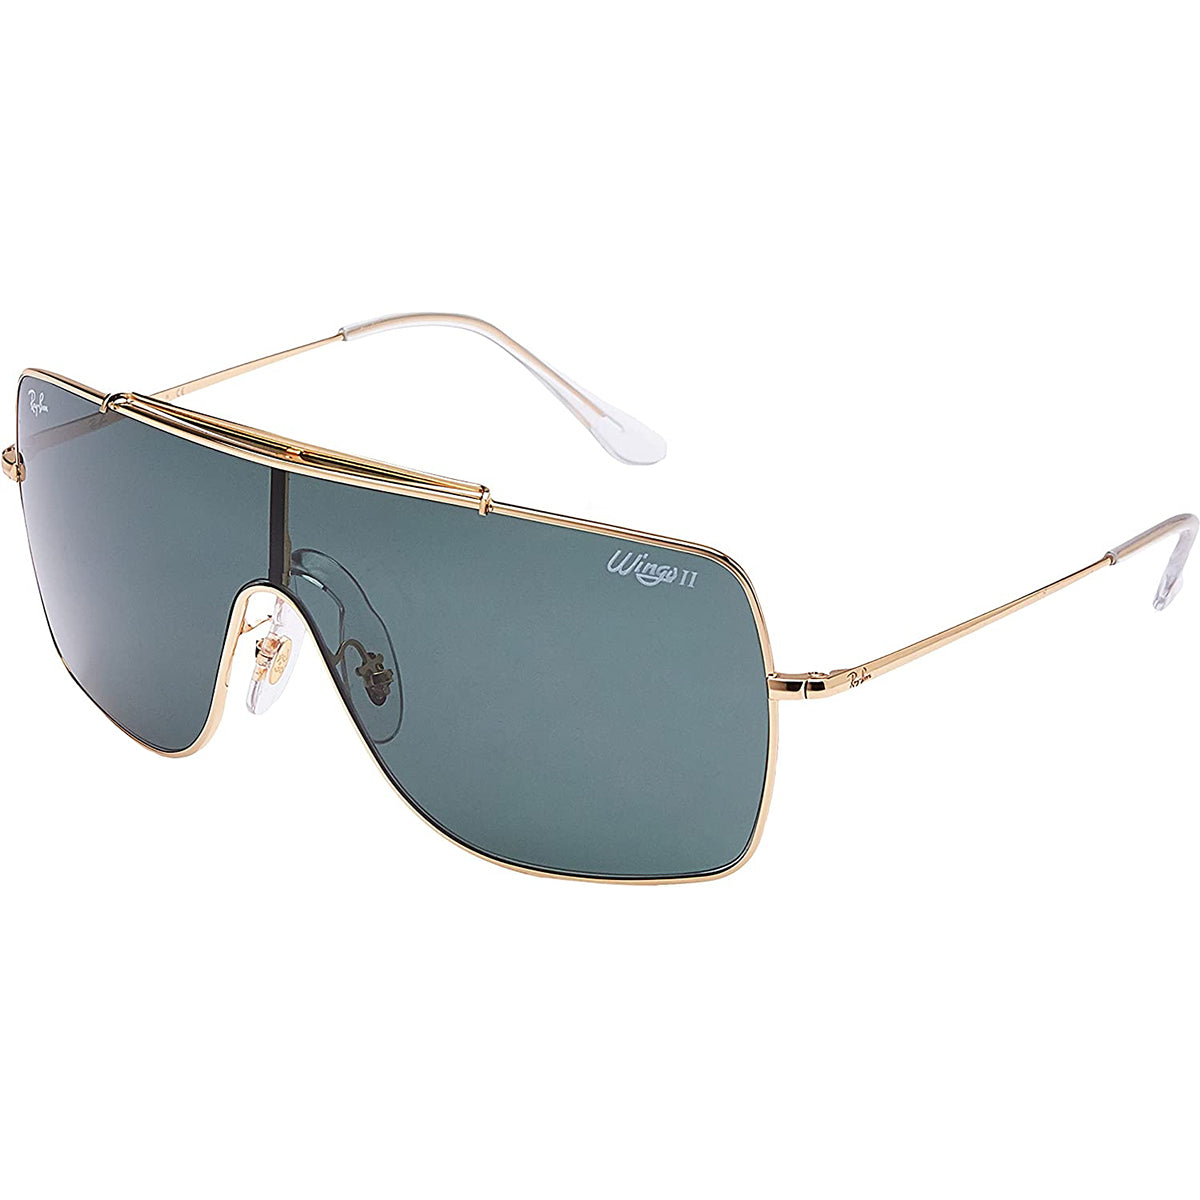 Ray-Ban Wings II Men's Wireframe Sunglasses-0RB3697